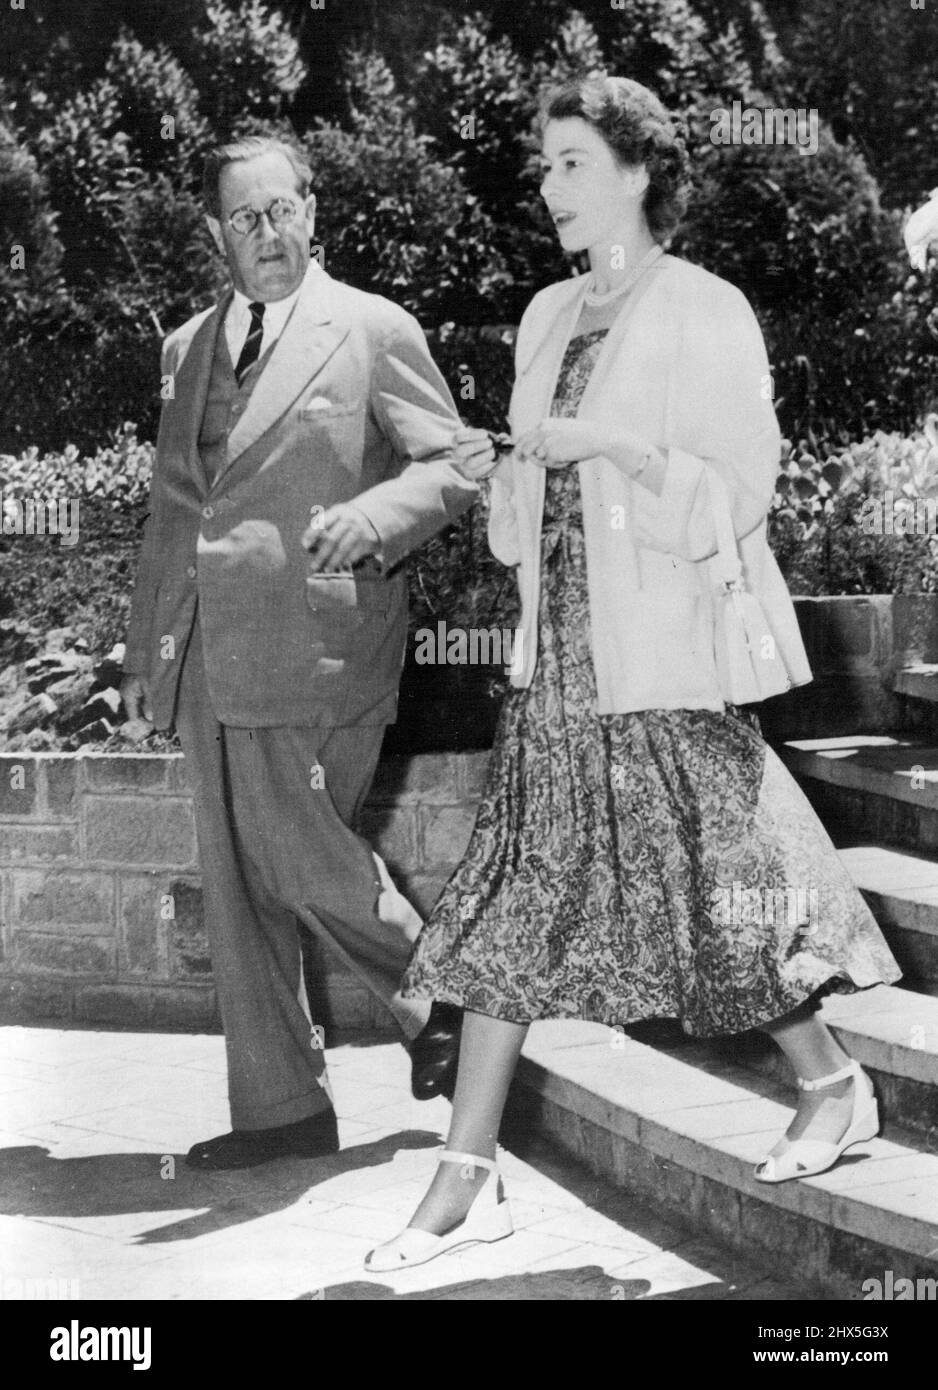 The New Queen In Africa - Before Tragic News Of Father's Death -- Princess Elizabeth, now Queen following the sudden, tragic death of her father, King George VI, walks through the Kenya sunshine with Sir Philip Mitchell, Governor of Kenya, at Sagana lodge, Nyeri, the Colony's wedding present to the Princess and her husband, the Duke of Edinburgh. (This picture of the Royal tour was received in London just a few hours after the announcement of the King's death). February 02, 1952. Stock Photo